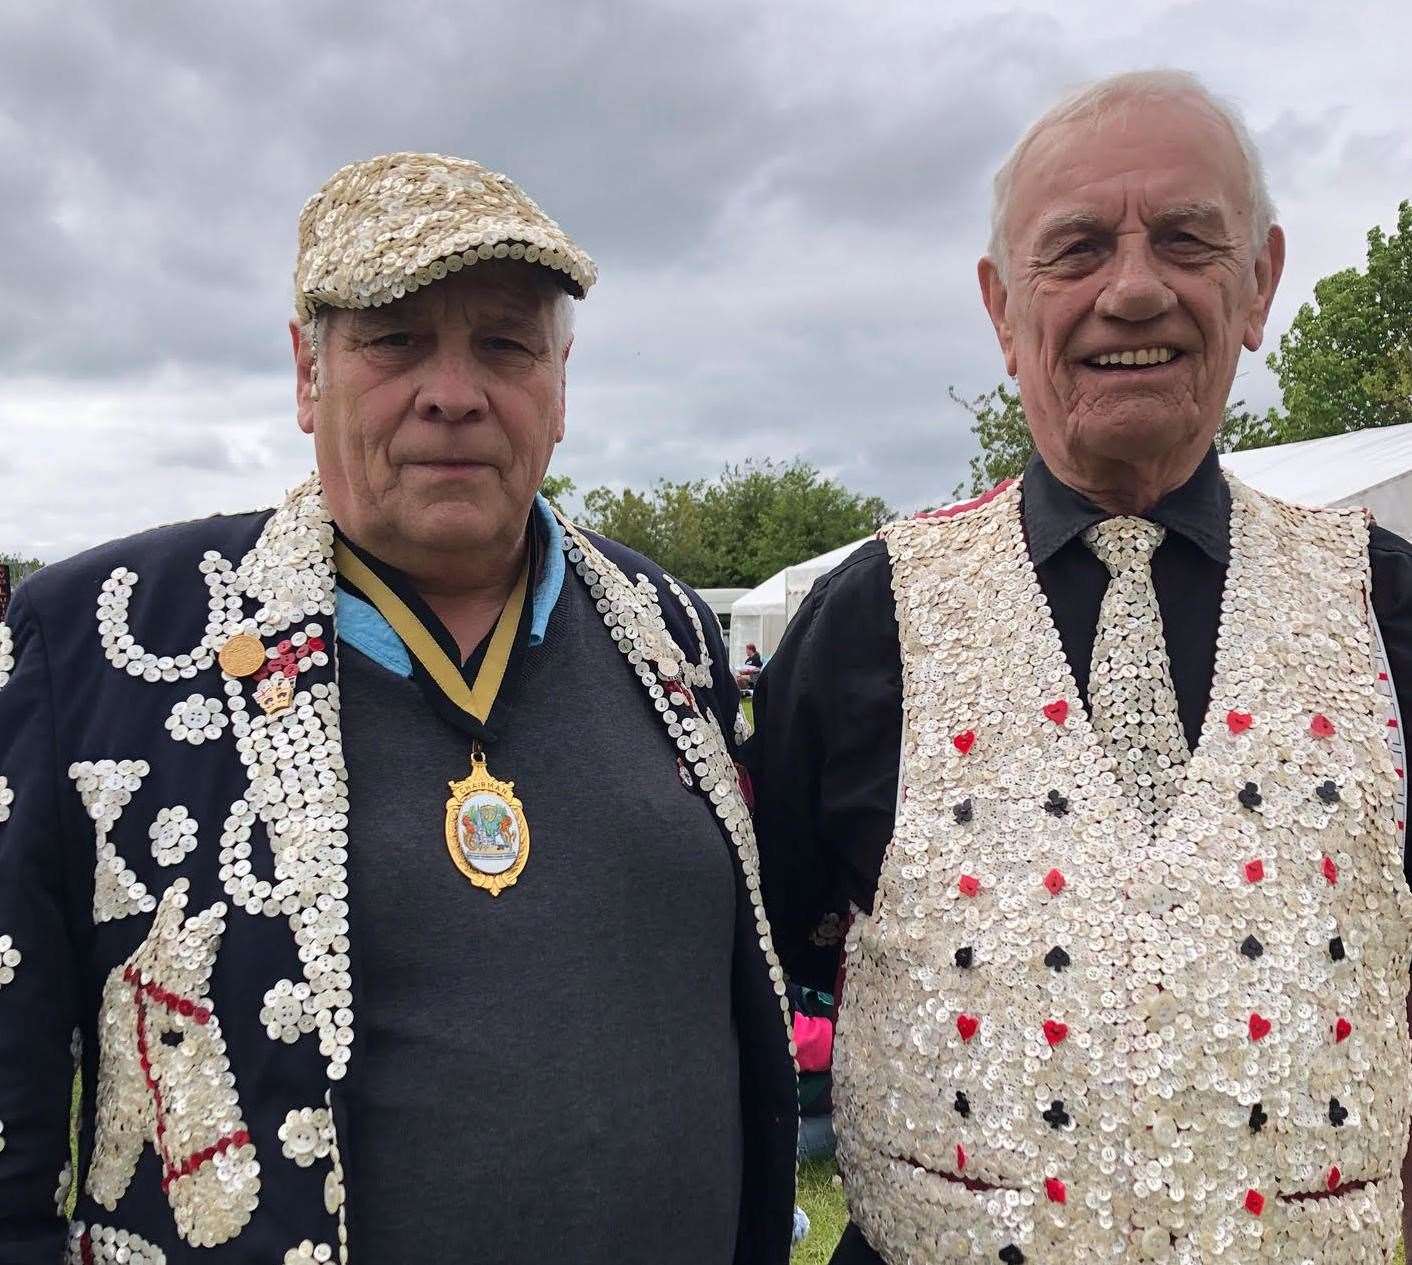 Ron with the Pearly King of Mile End at one of his country shows